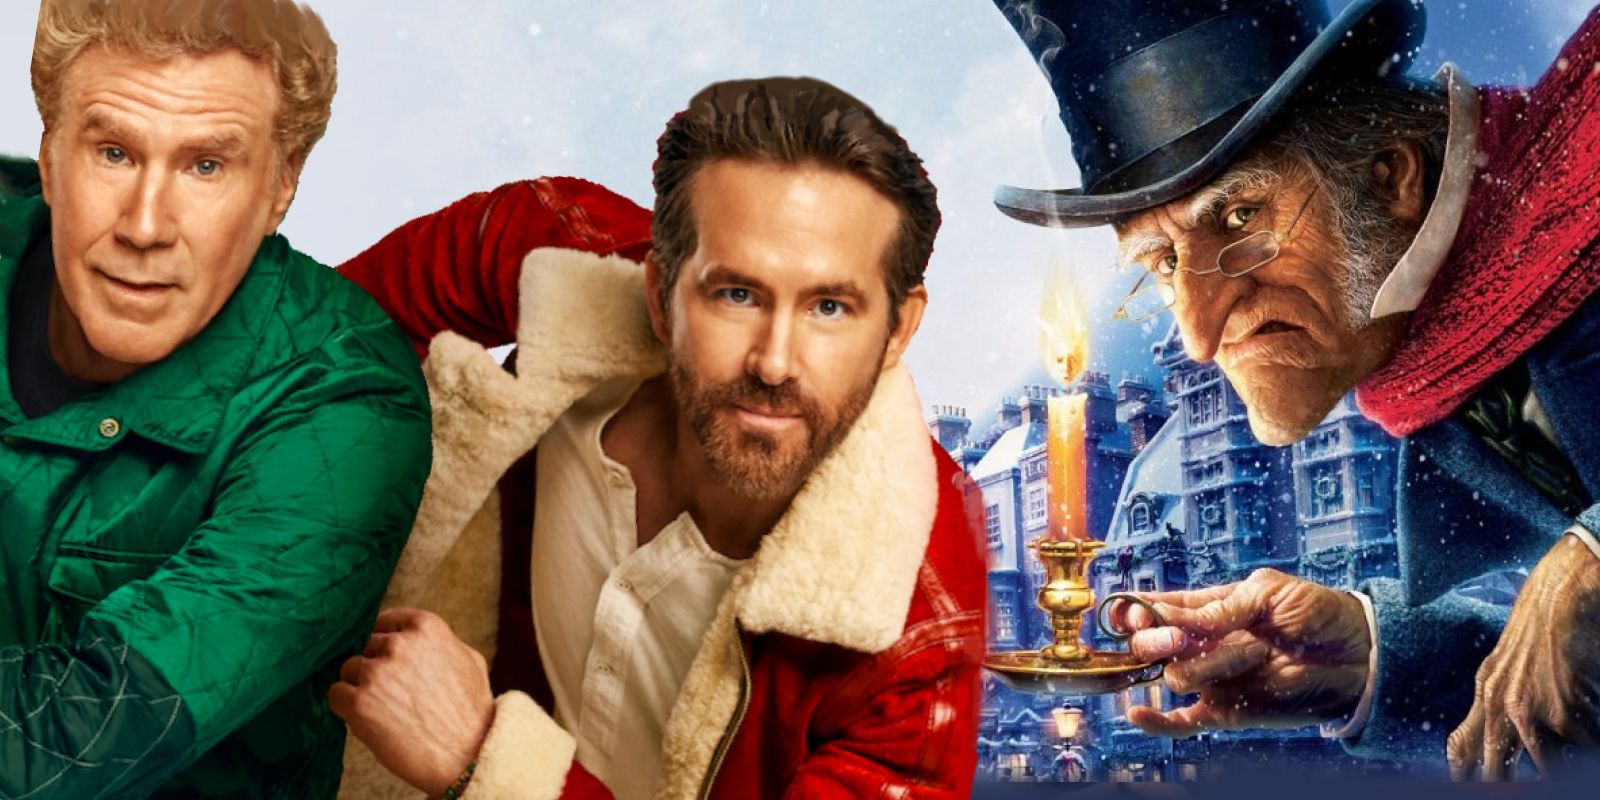 Will Ferrell and Ryan Reynolds poster for Spirited next to A Christmas Carol’s Scrooge. 